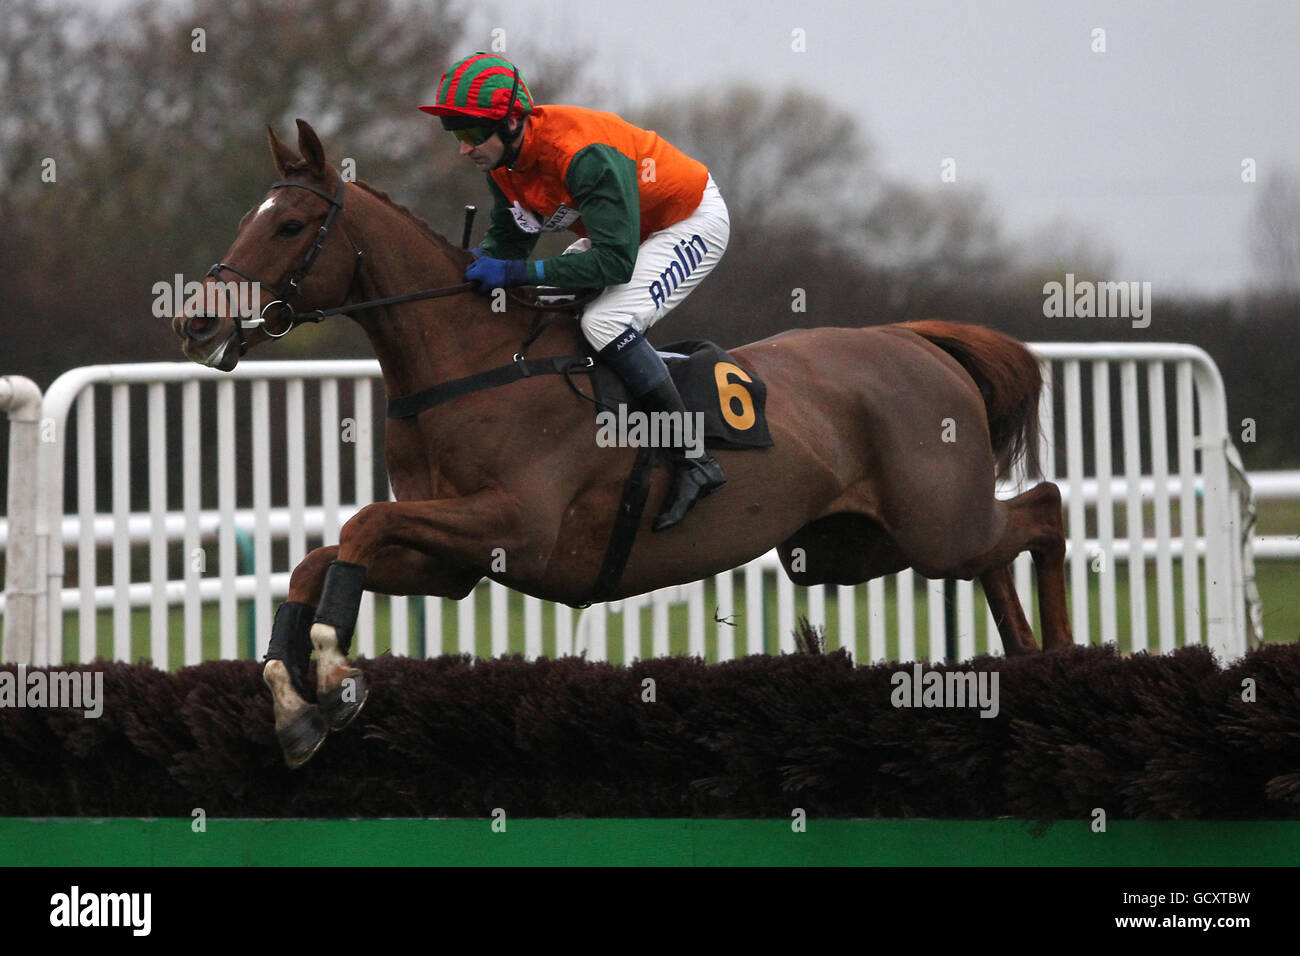 Horse Racing - Southwell Racecourse. Jockey Andrew Thornton on Hardwick Wood jumps during the Southwell Golf Club Lady Members Novices' Hurdle Stock Photo